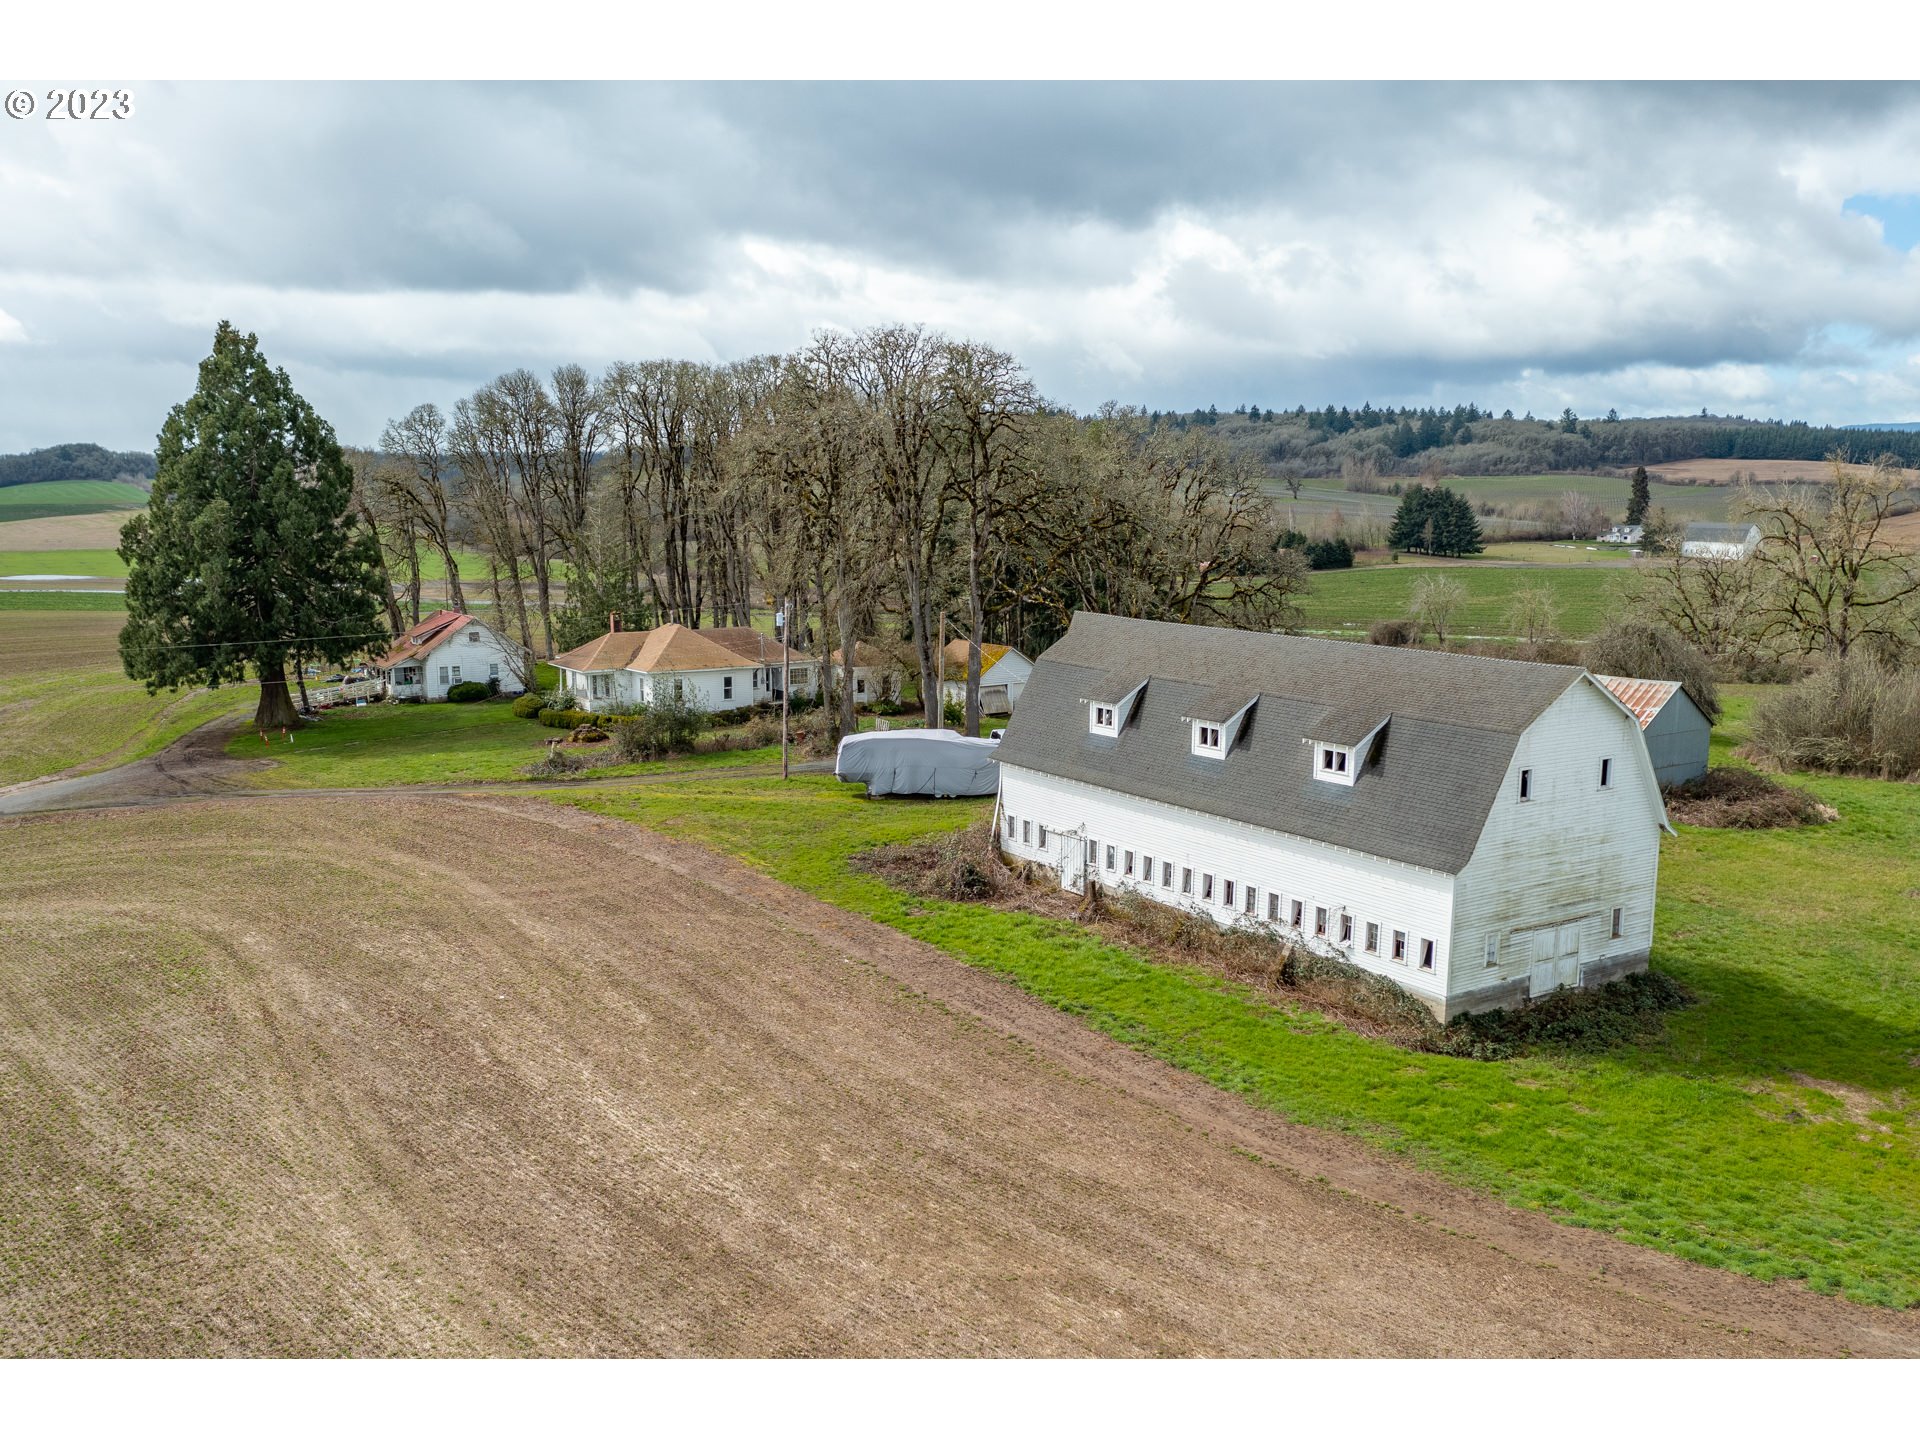 5815 N PACIFIC HWY, Rickreall, OR 